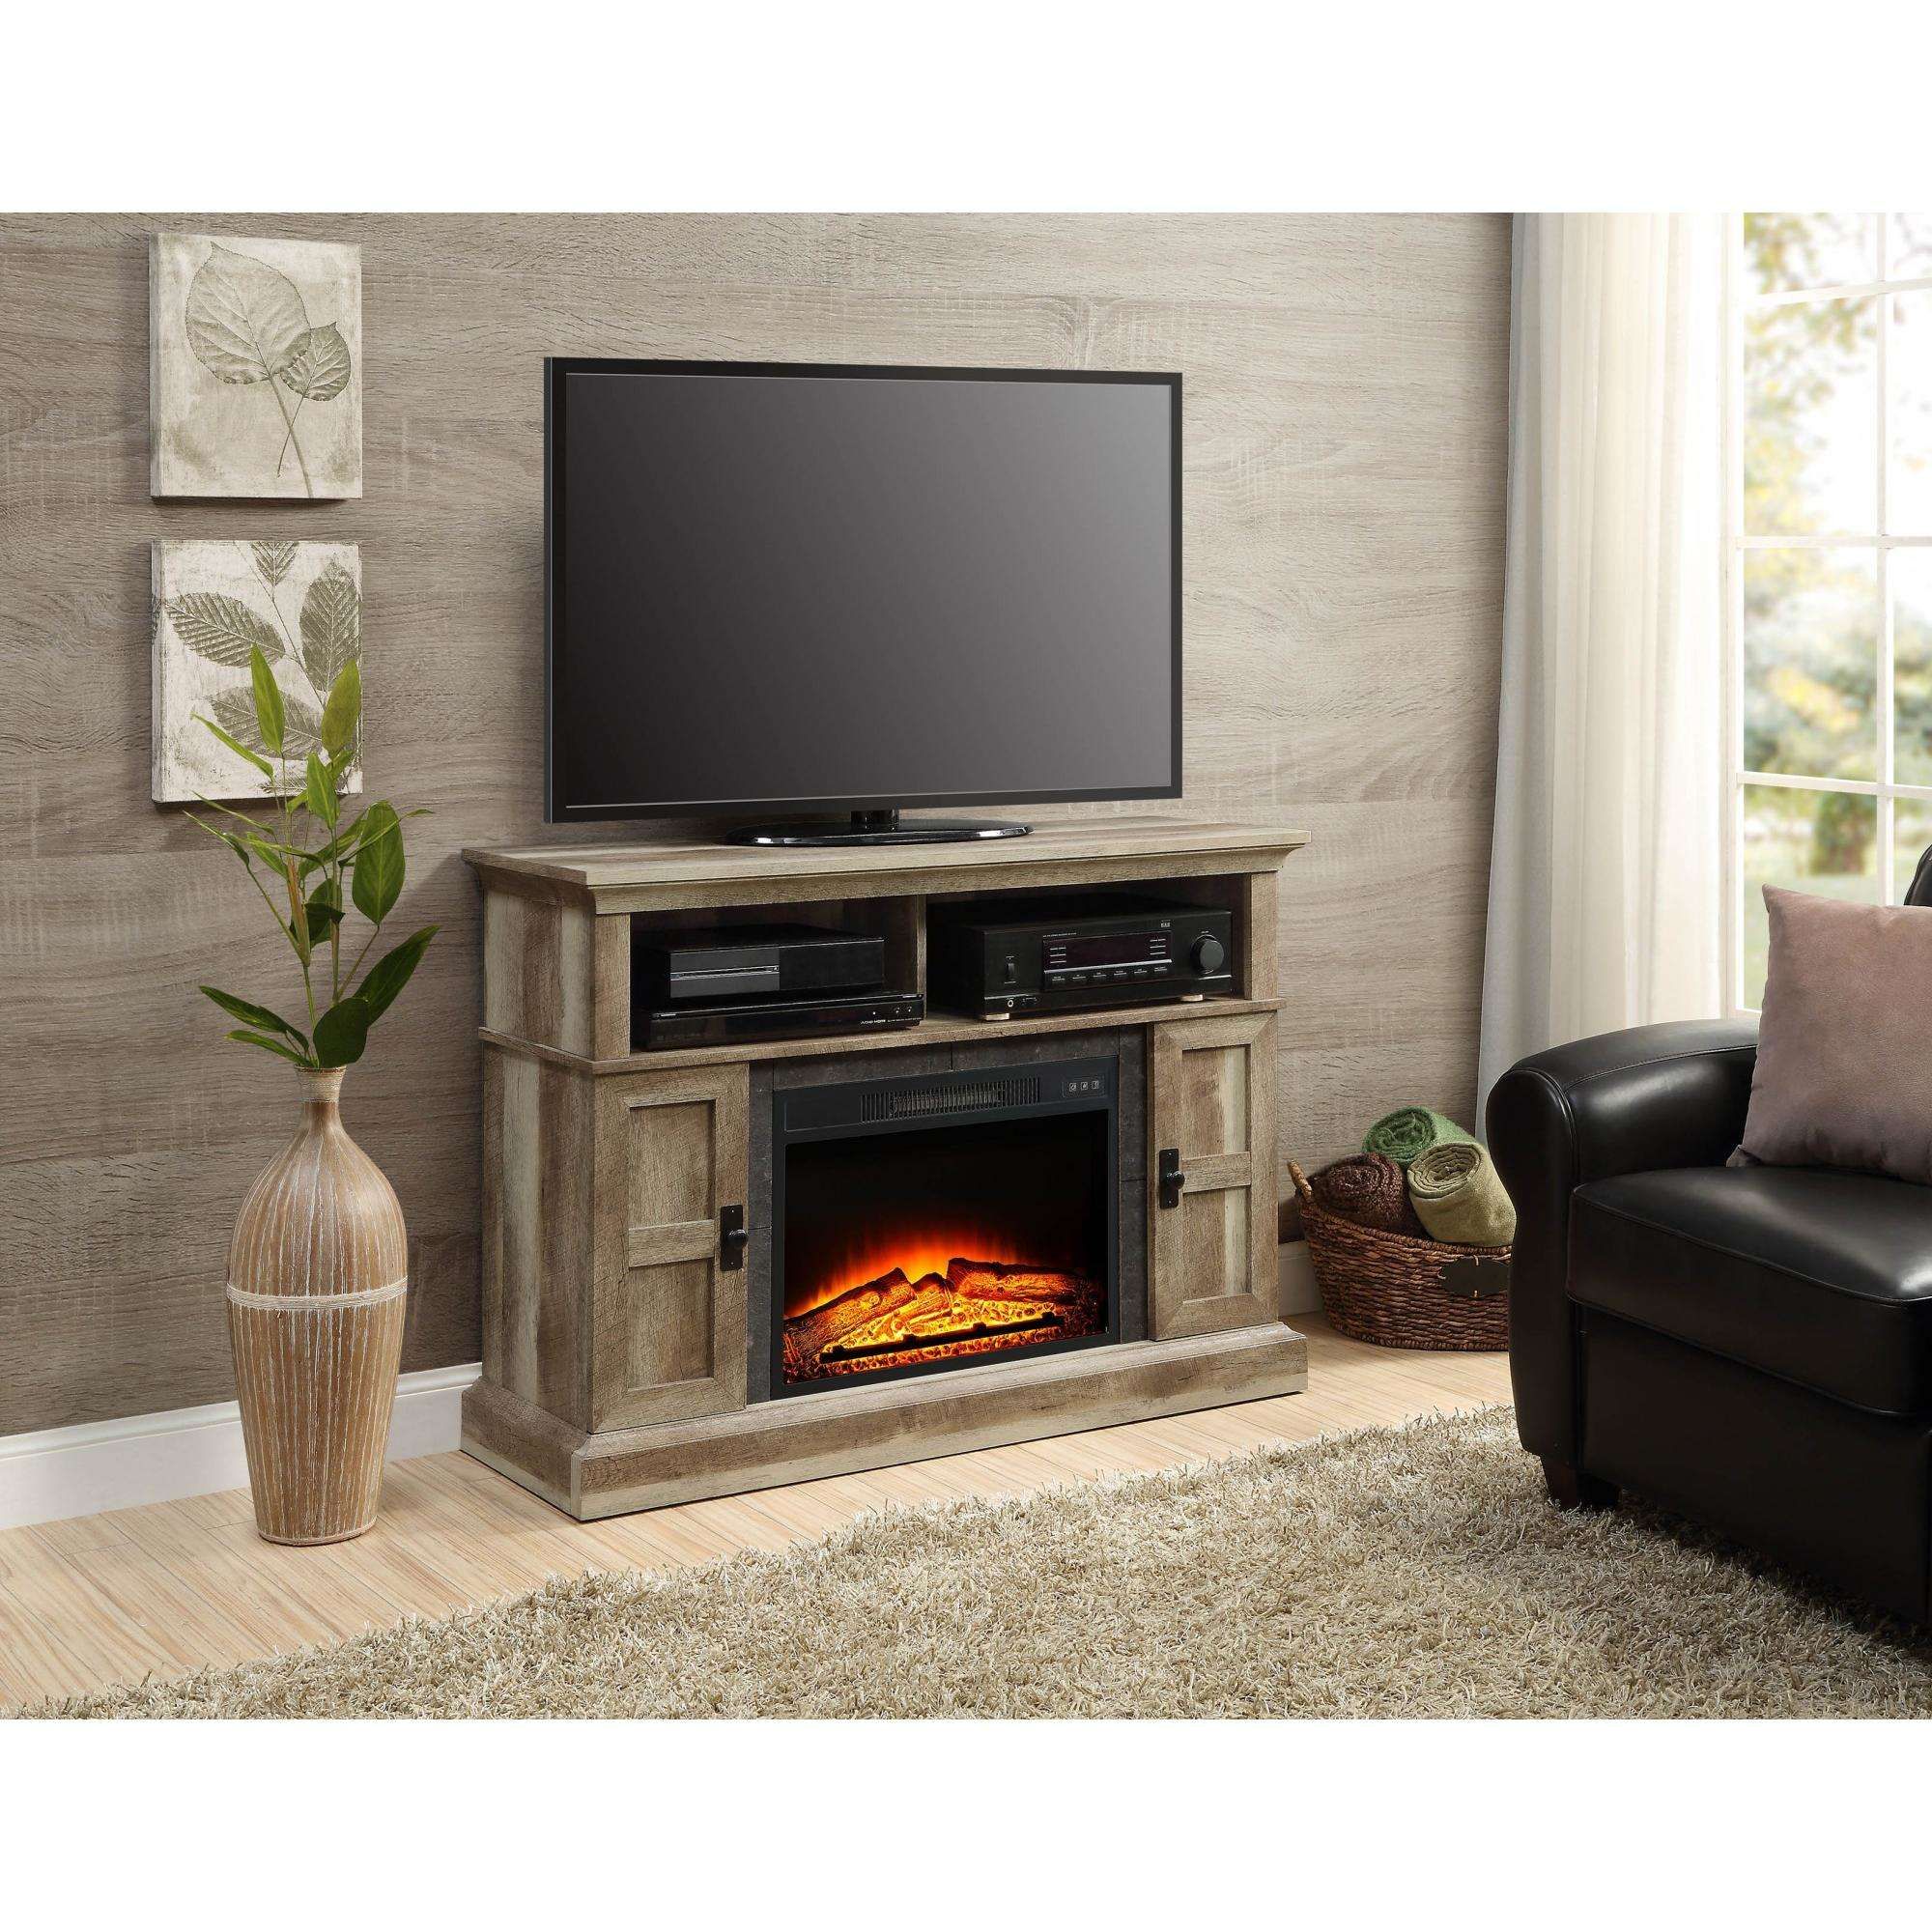 Media Fireplace Luxury Whalen Media Fireplace for Your Home Television Stand Fits